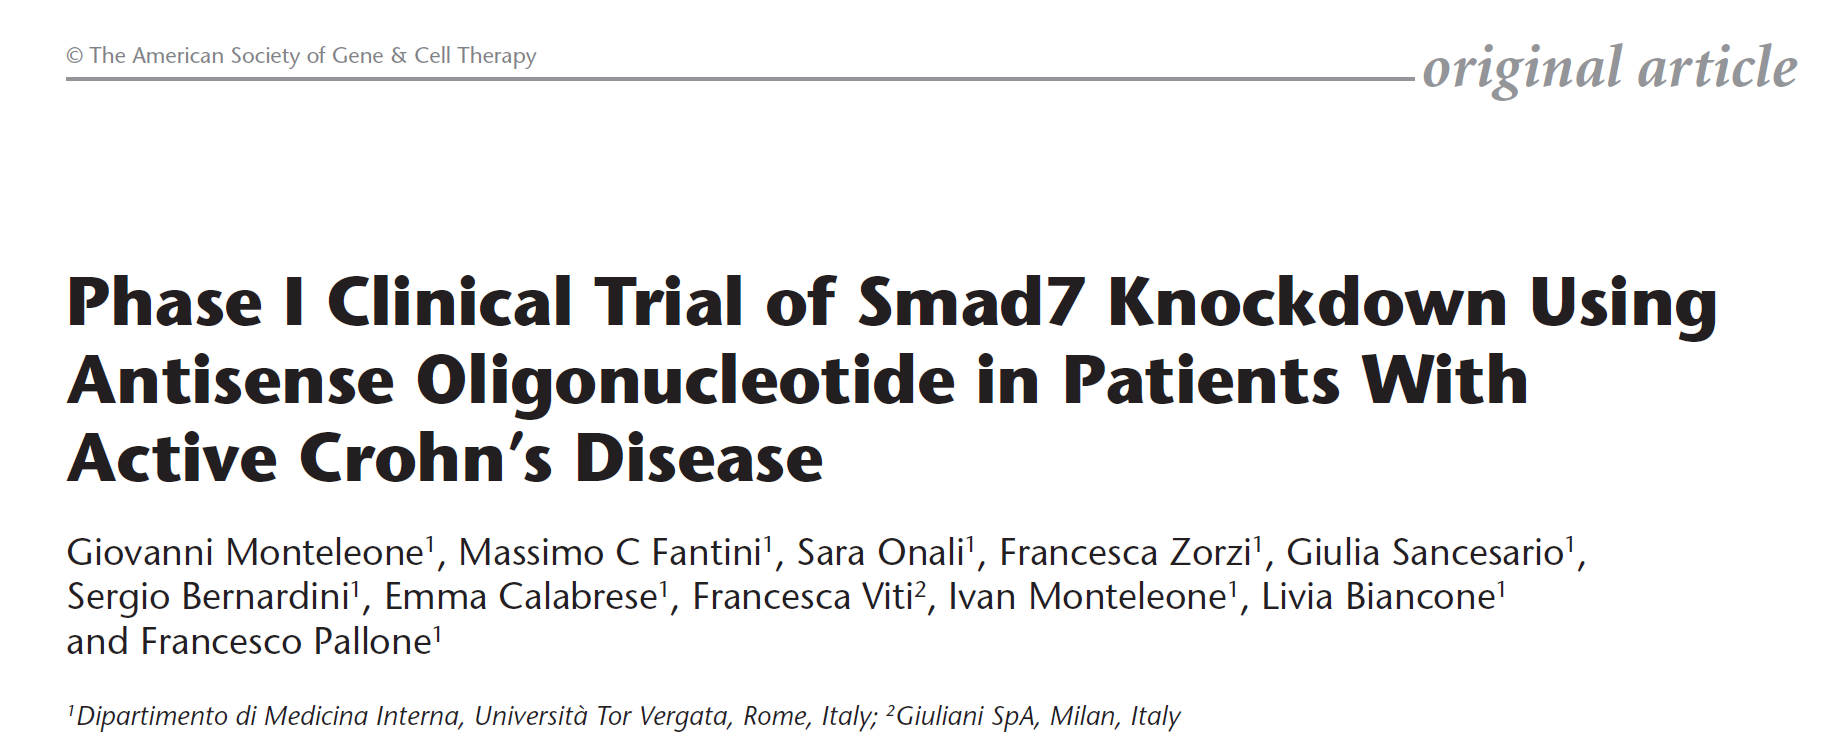 Phase I Clinical Trial of Smad7 Knockdown Using Antisense Oligonucleotide in Patients With Active Crohn’s Disease